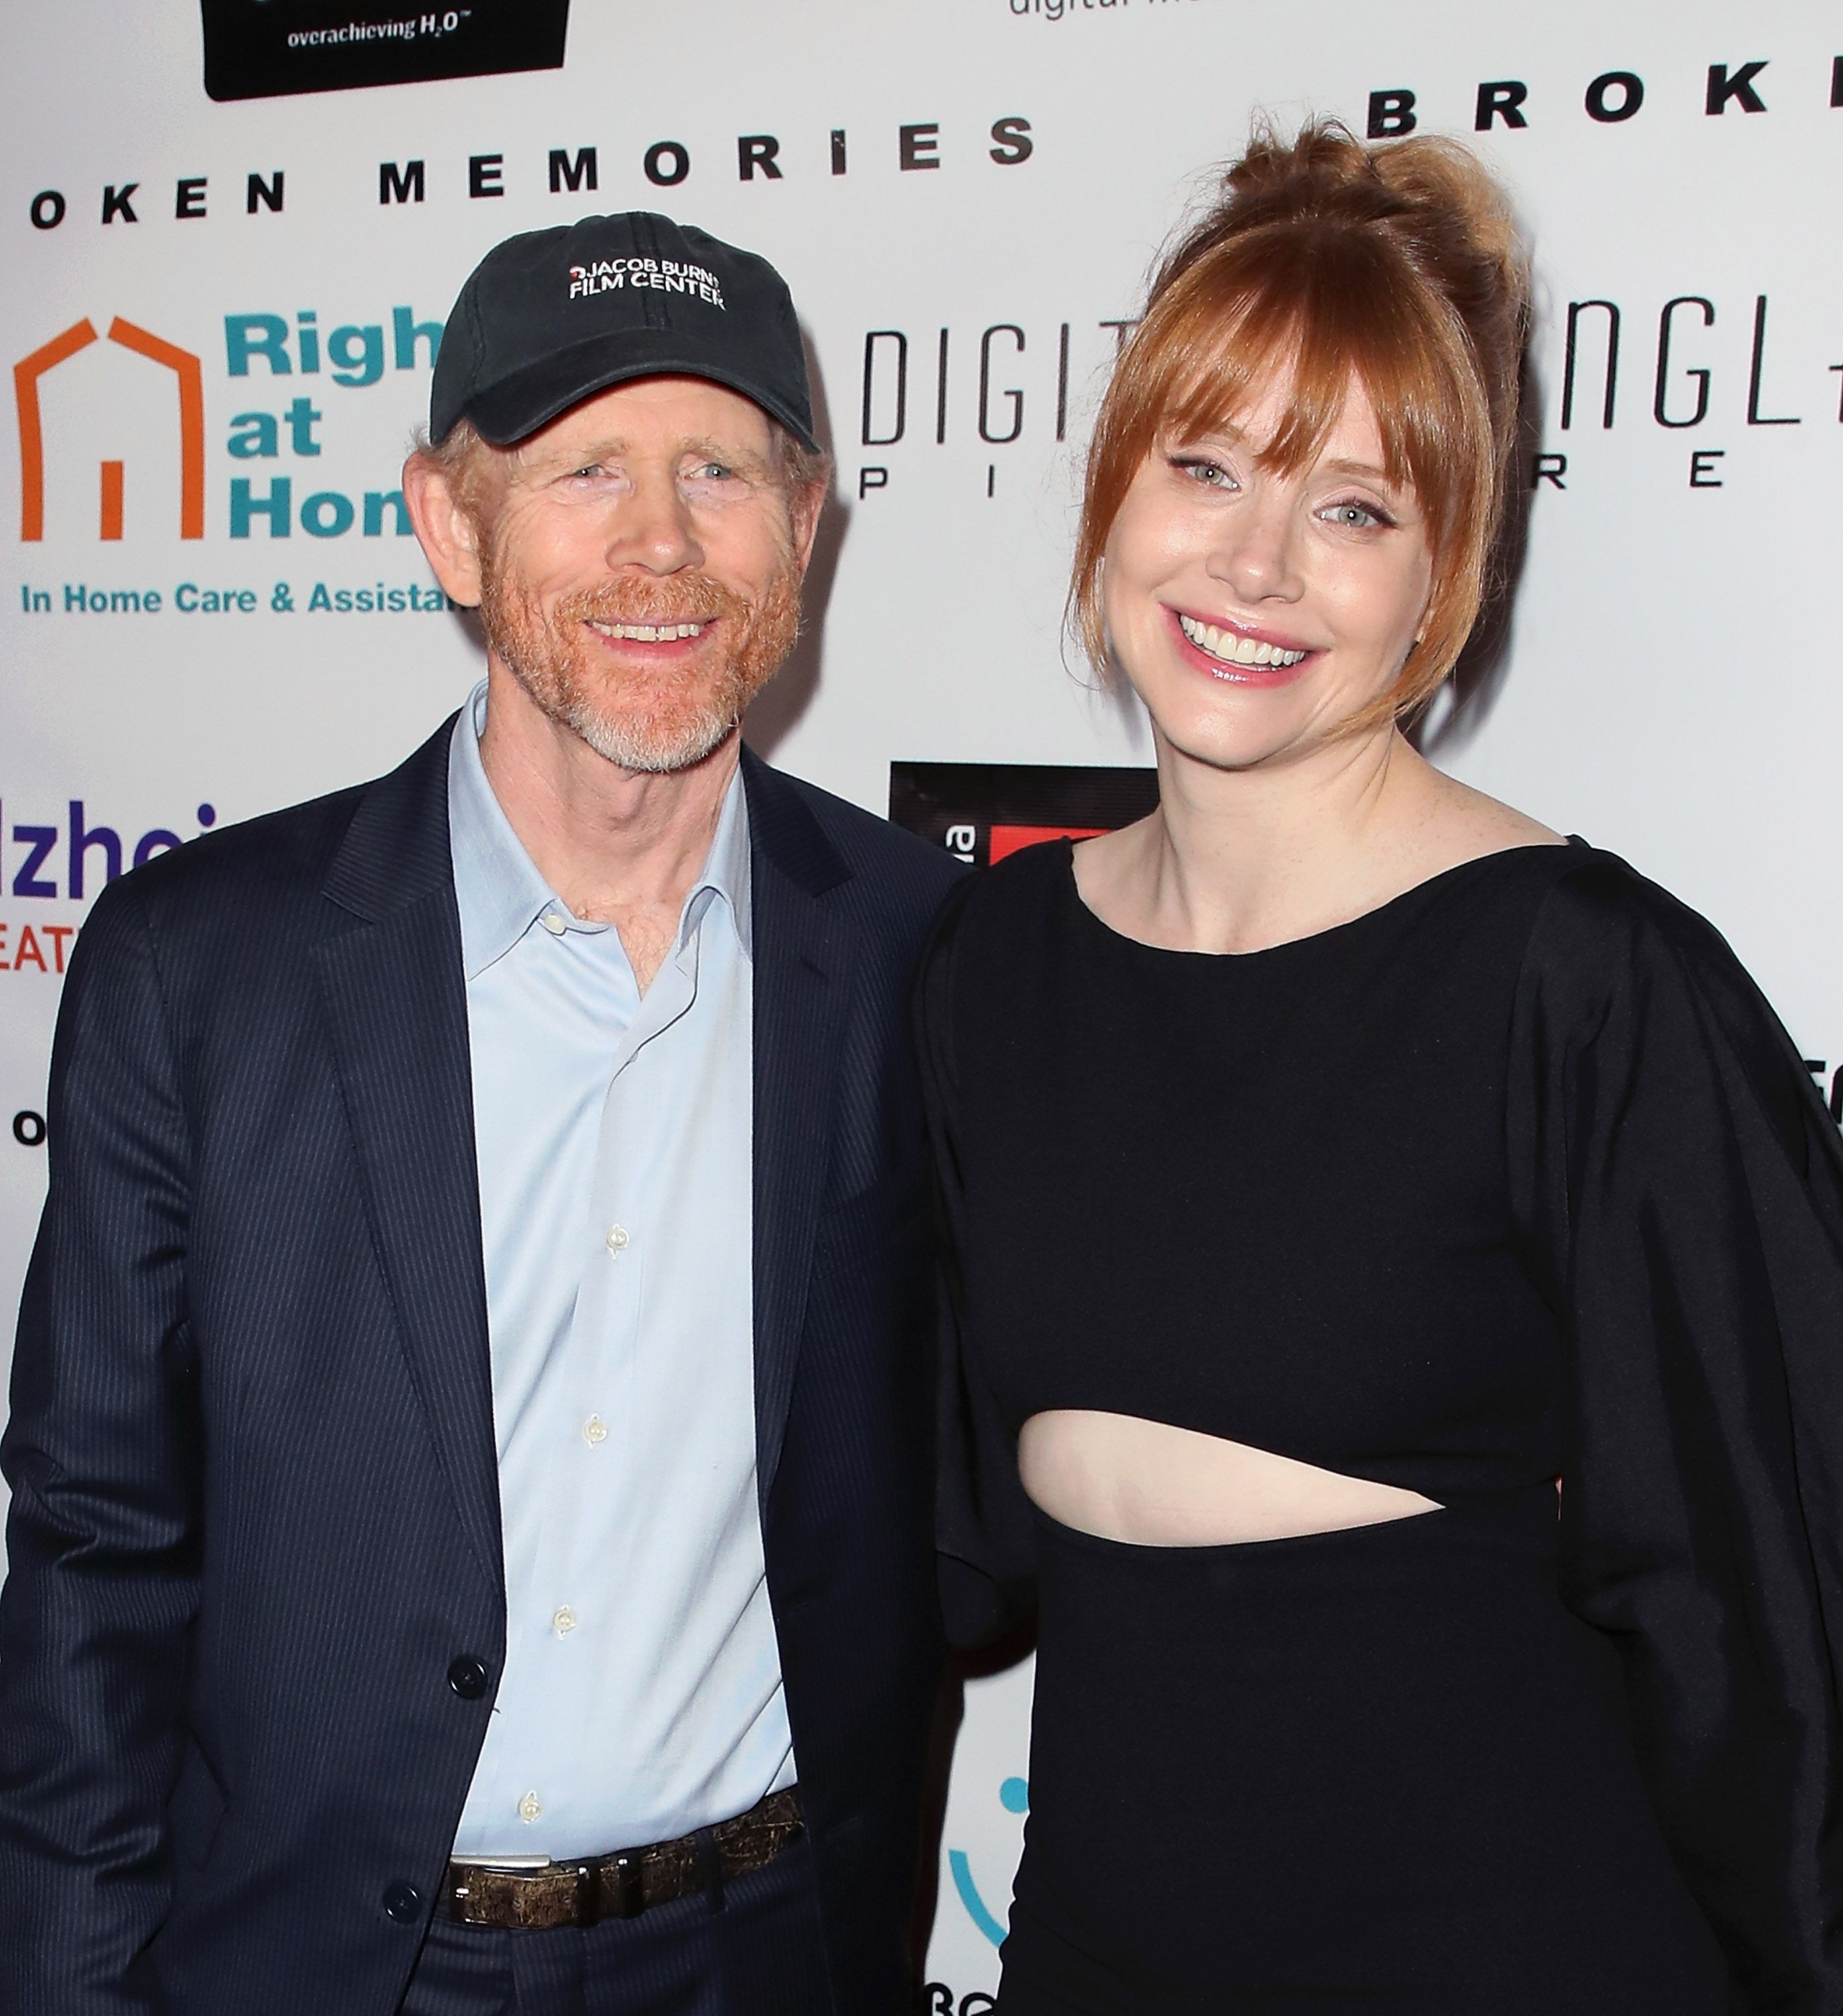 Ron Howard and his daughter Bryce Howard| Photo: Getty Images